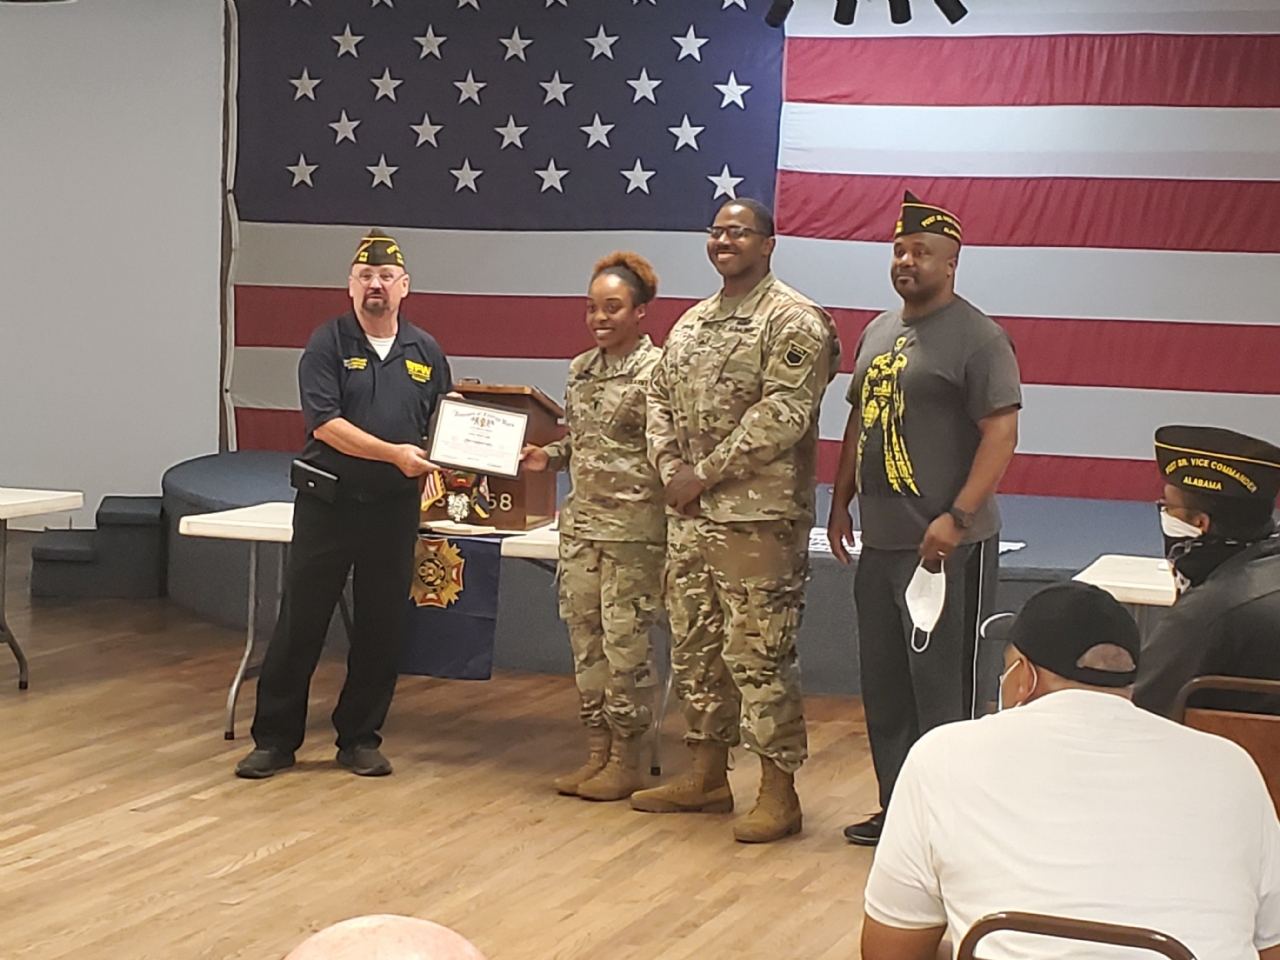 VFW Post 668 is proud to adopt the 318th Chemical Company of the United States Army!